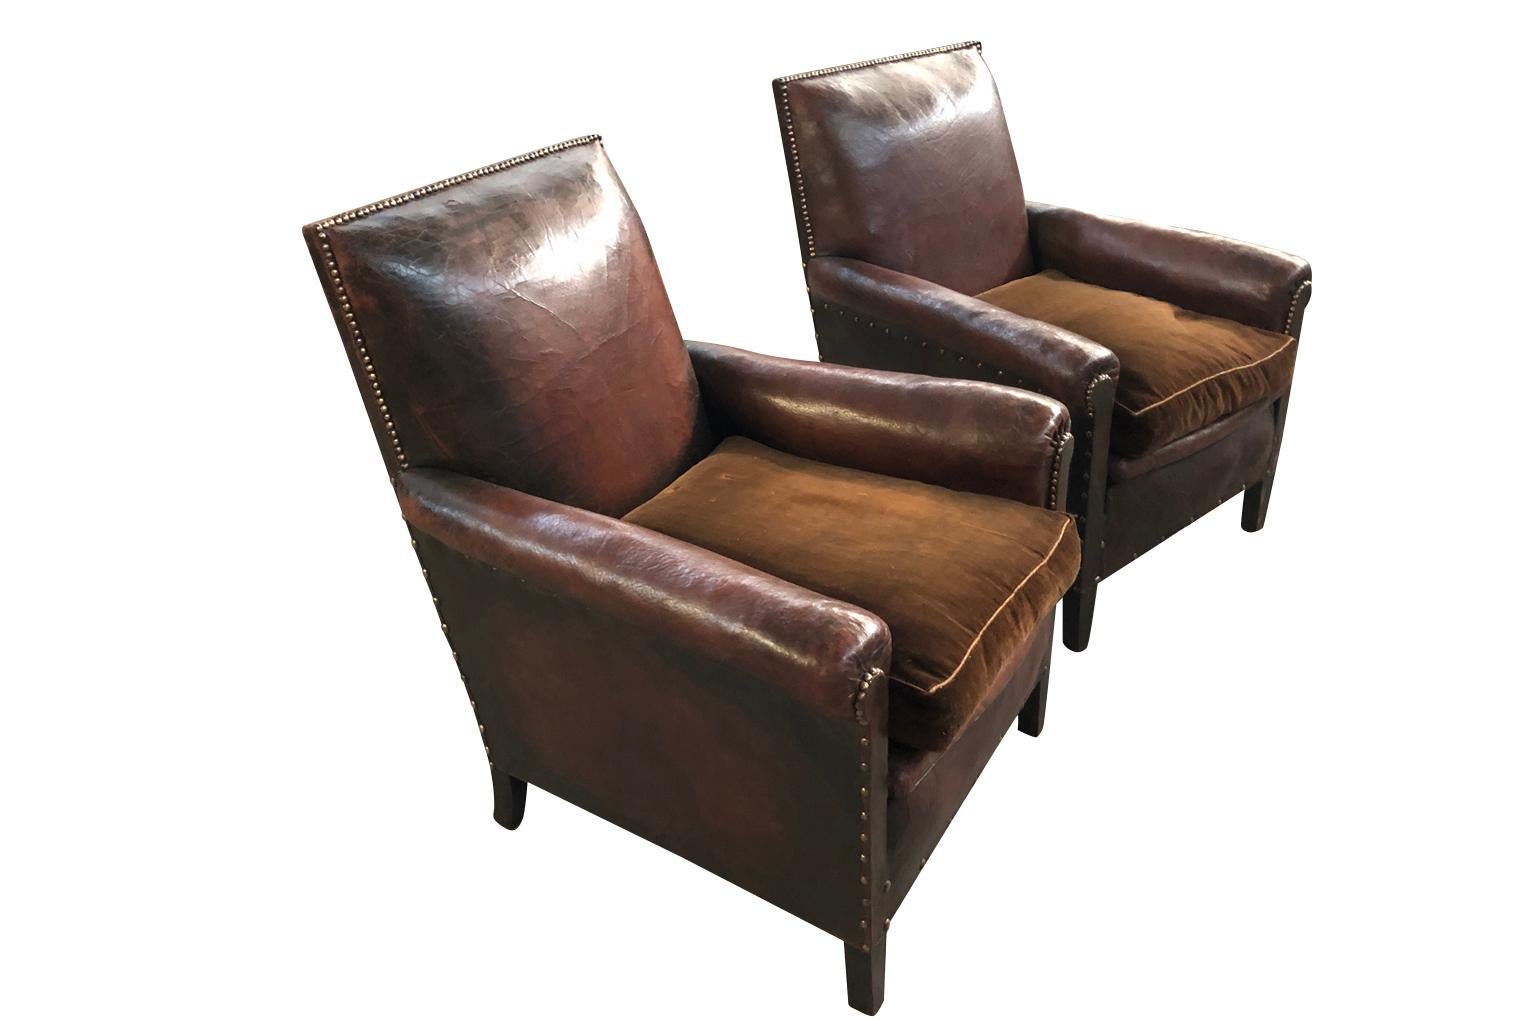 A fabulous pair of French Art Deco period club chairs in leather. Beautiful color and patina. Wonderful Minimalist lines.